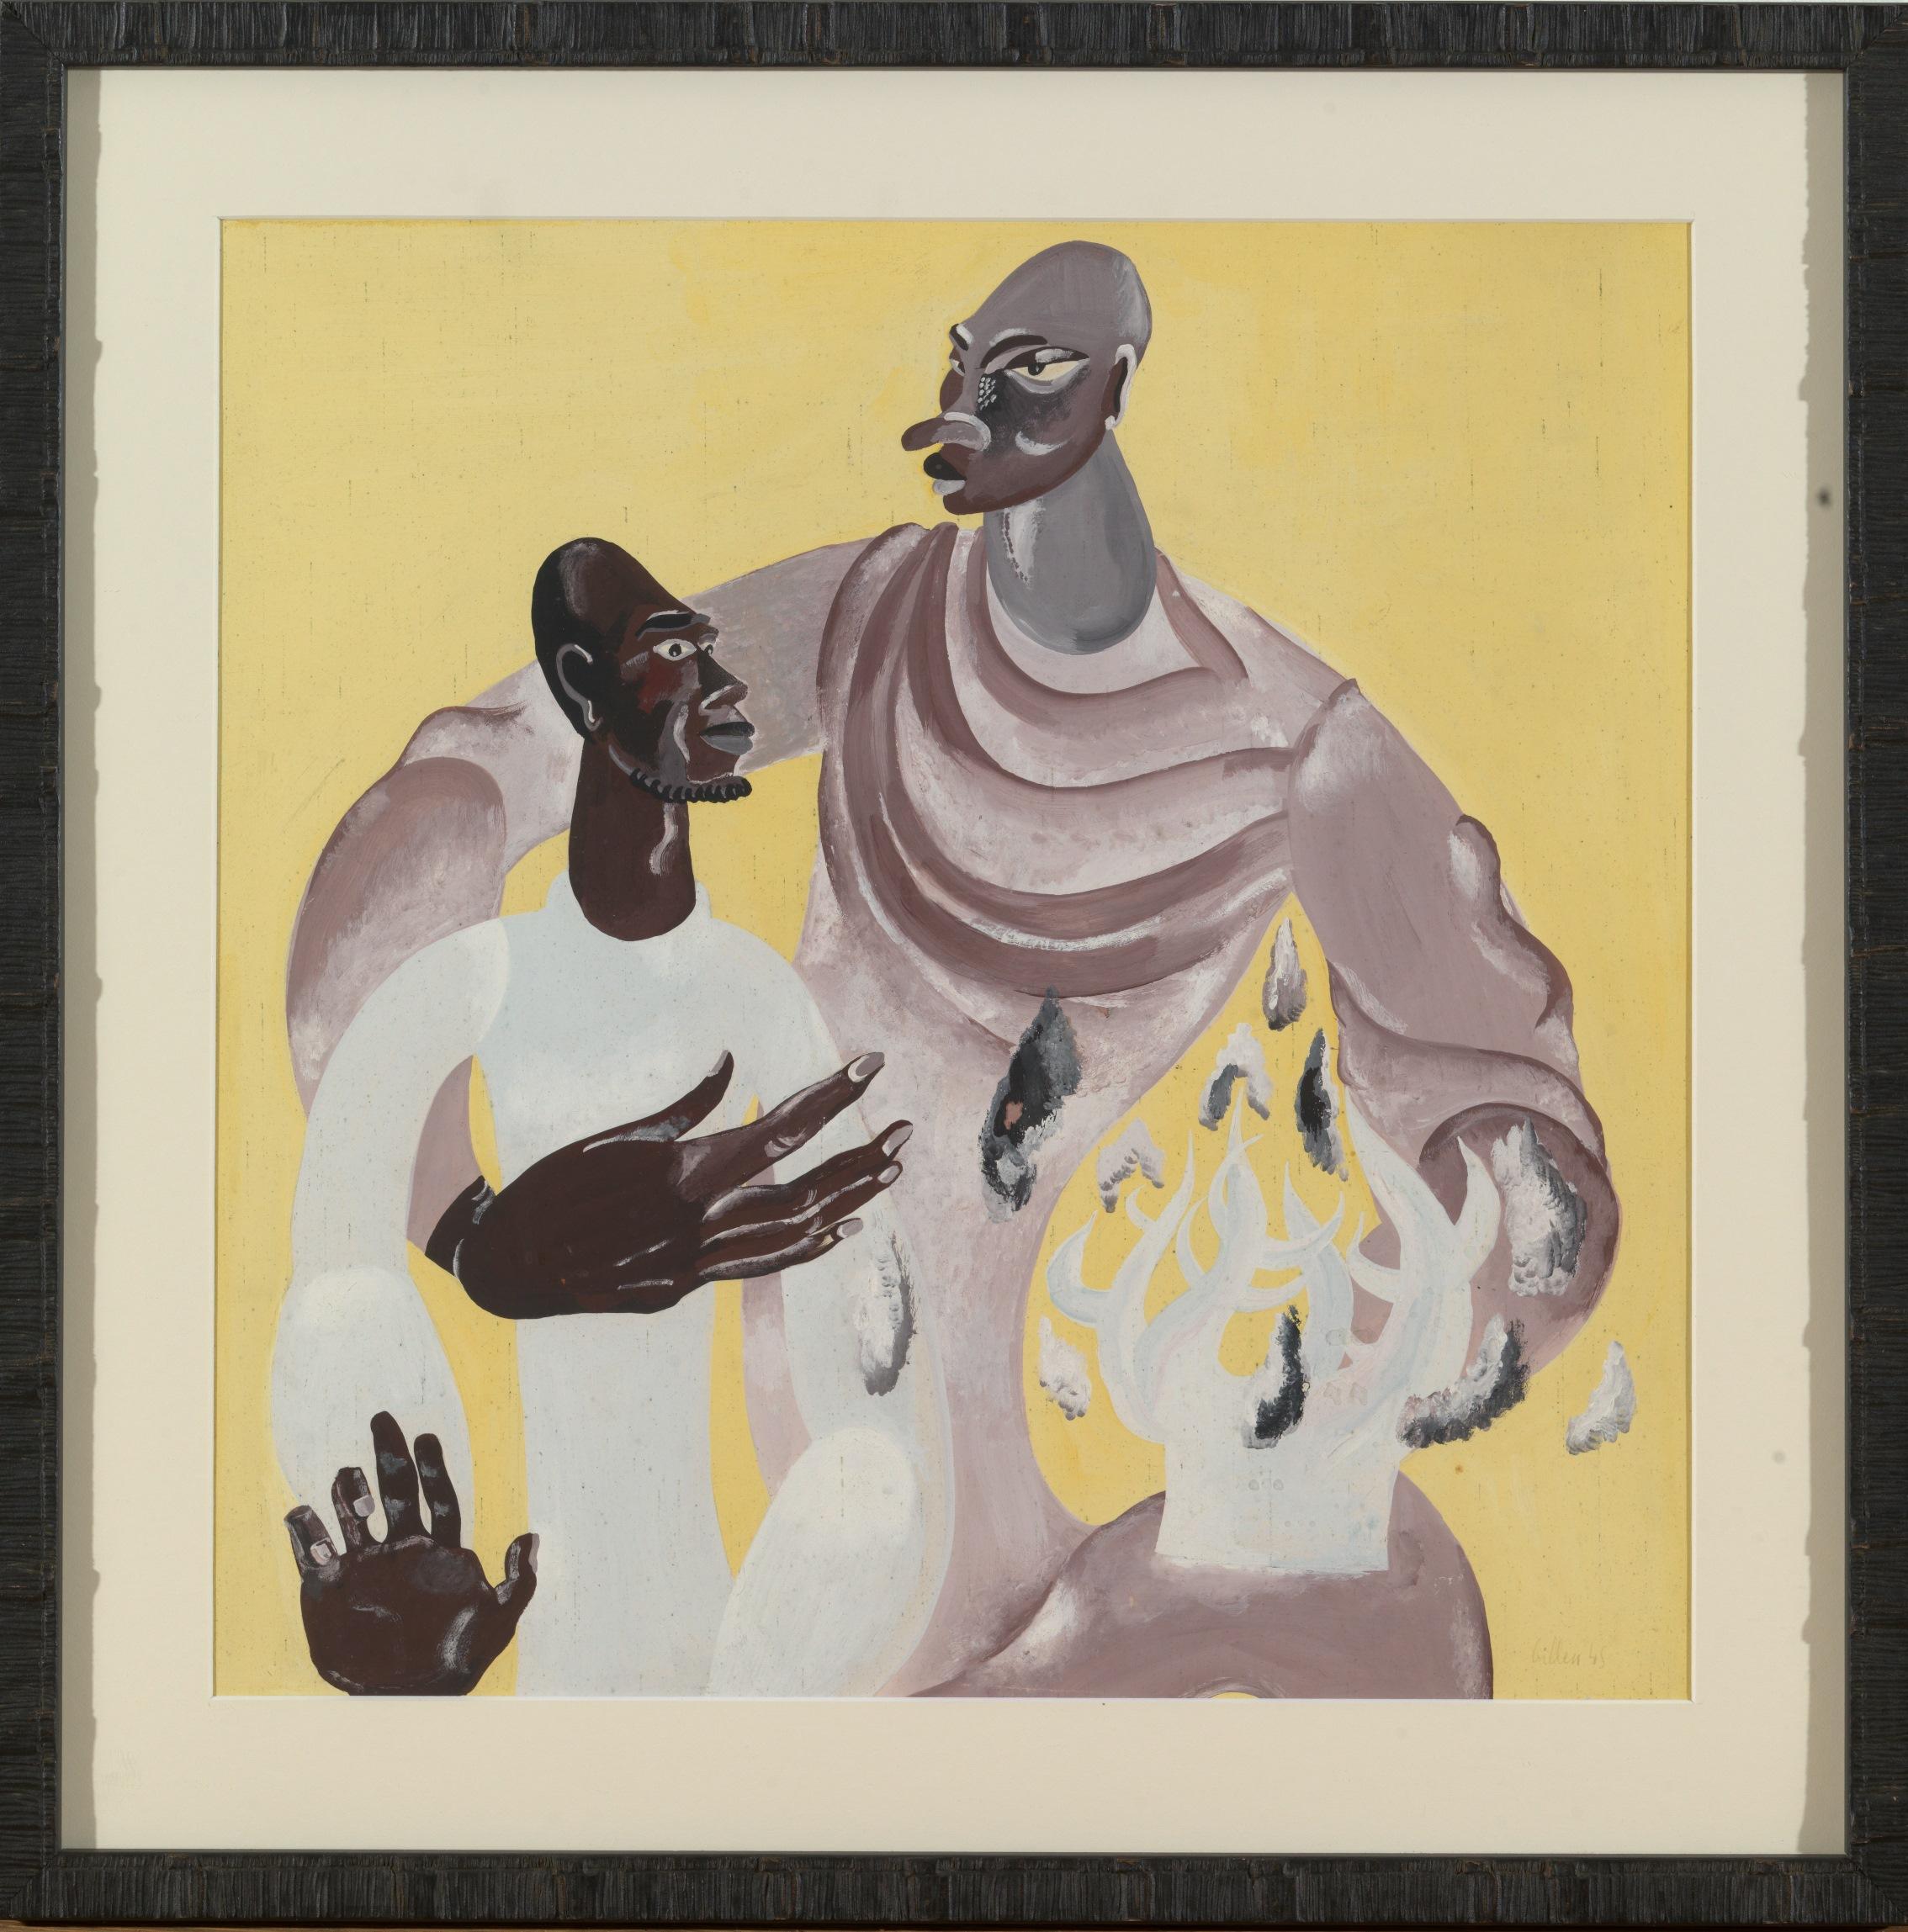 Shown in this beautiful piece of art are two Male Kongo Figures.
The work of artist André Billen (1921-1998) is deeply influenced by African culture.
 
Measurements of this piece are 41 x 41 cm without frame, 53.5 x 53.5 cm with frame.

This